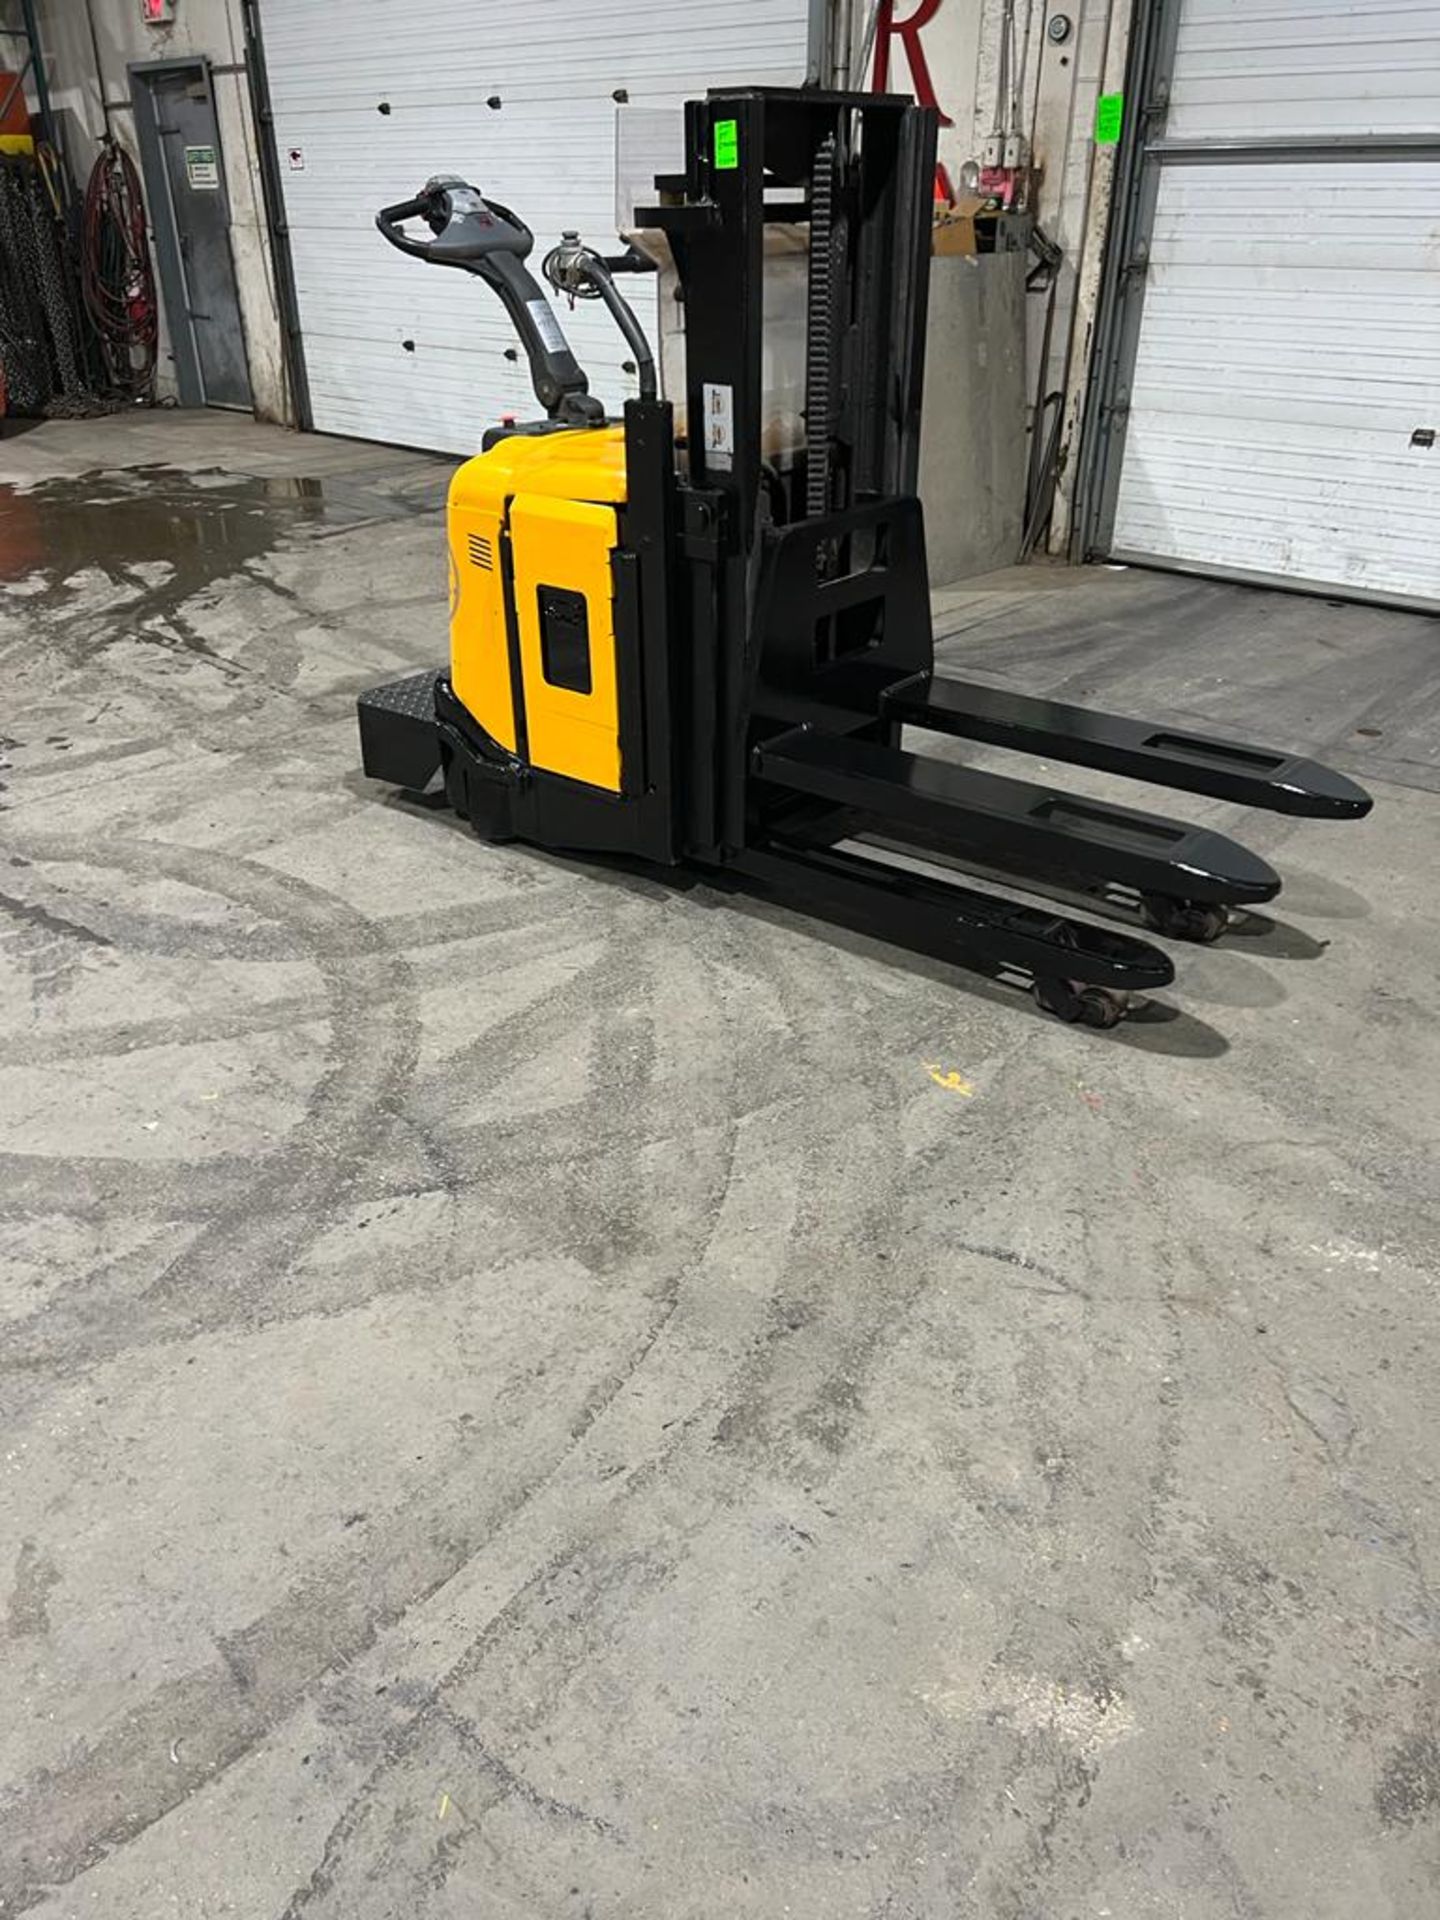 NICE BT Pallet Stacker RIDE ON 5000lbs capacity electric Powered Pallet Cart 24V with LOW HOURS FREE - Image 2 of 6